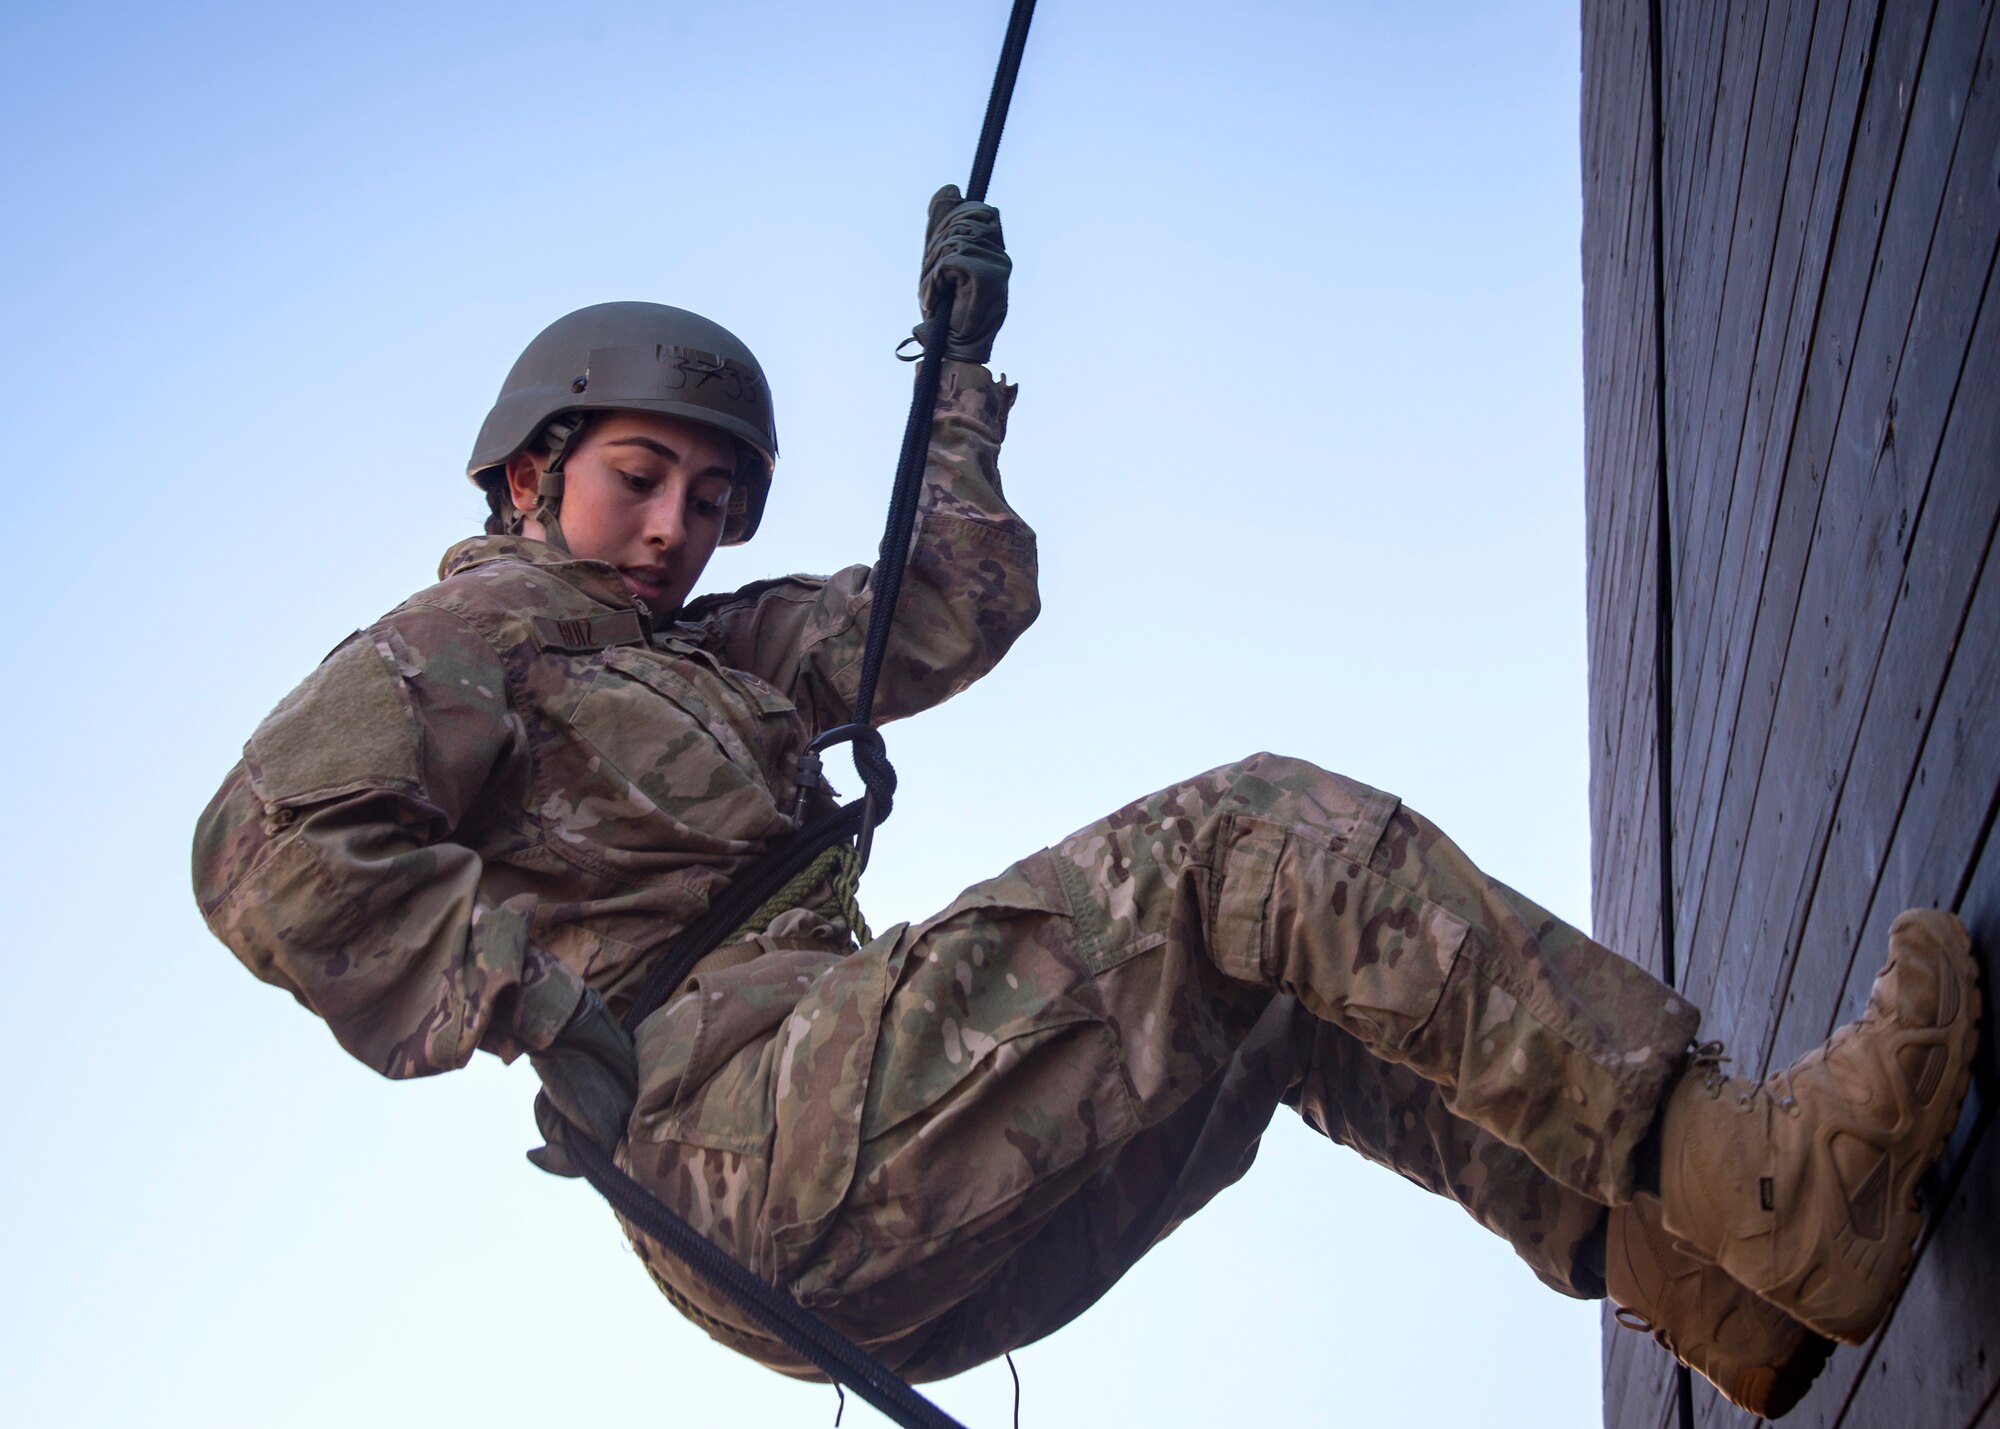 Airman First Class Madison Ruiz, 823 Base Defense Squadron security forces member, prepares to rappel down the Safeside Rappel Tower during an Army Air Assault Assessment (AAA), Jan. 28, 2019, at Moody Air Force Base, Ga. The AAA is designed to determine Airmen’s physical and mental readiness before being able to attend Army Air Assault school. (U.S. Air Force photo by Airman First Class Eugene Oliver)